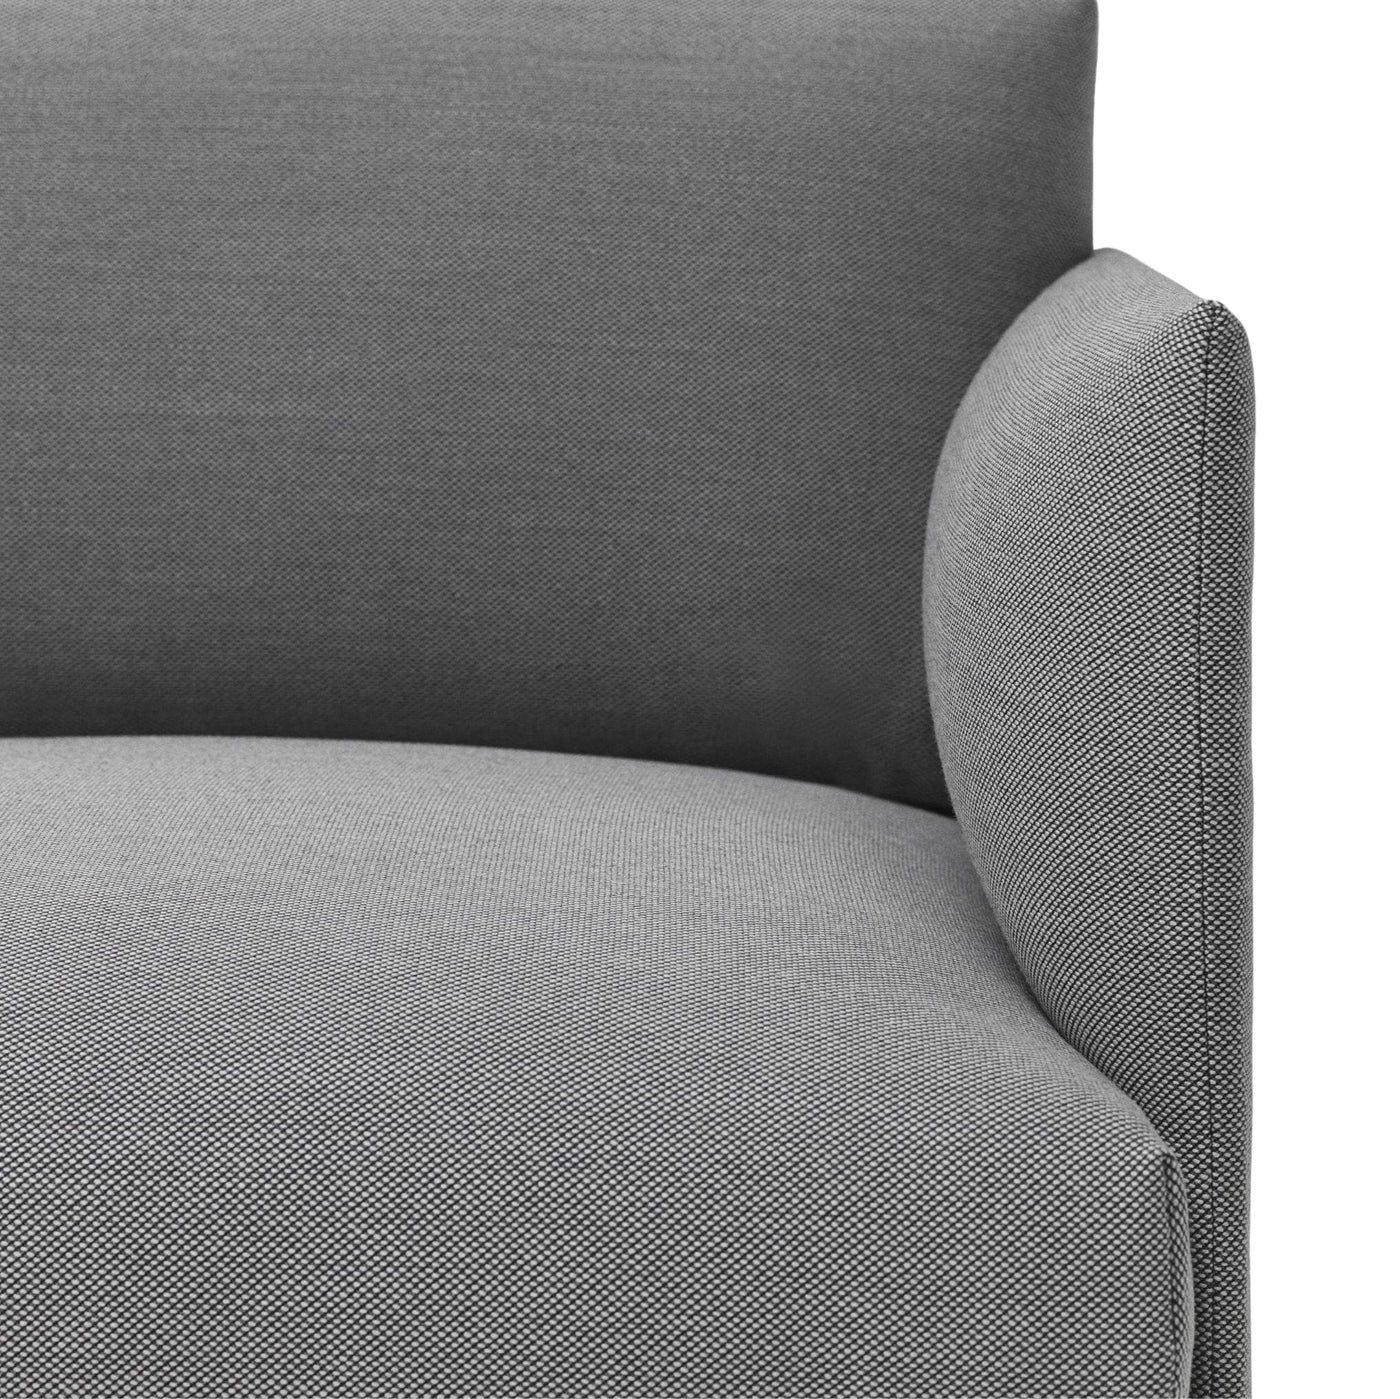 Outline Sofa Studio in Steelcut Trio 133 grey fabric. Made to order from someday designs.  #colour_steelcut-trio-133